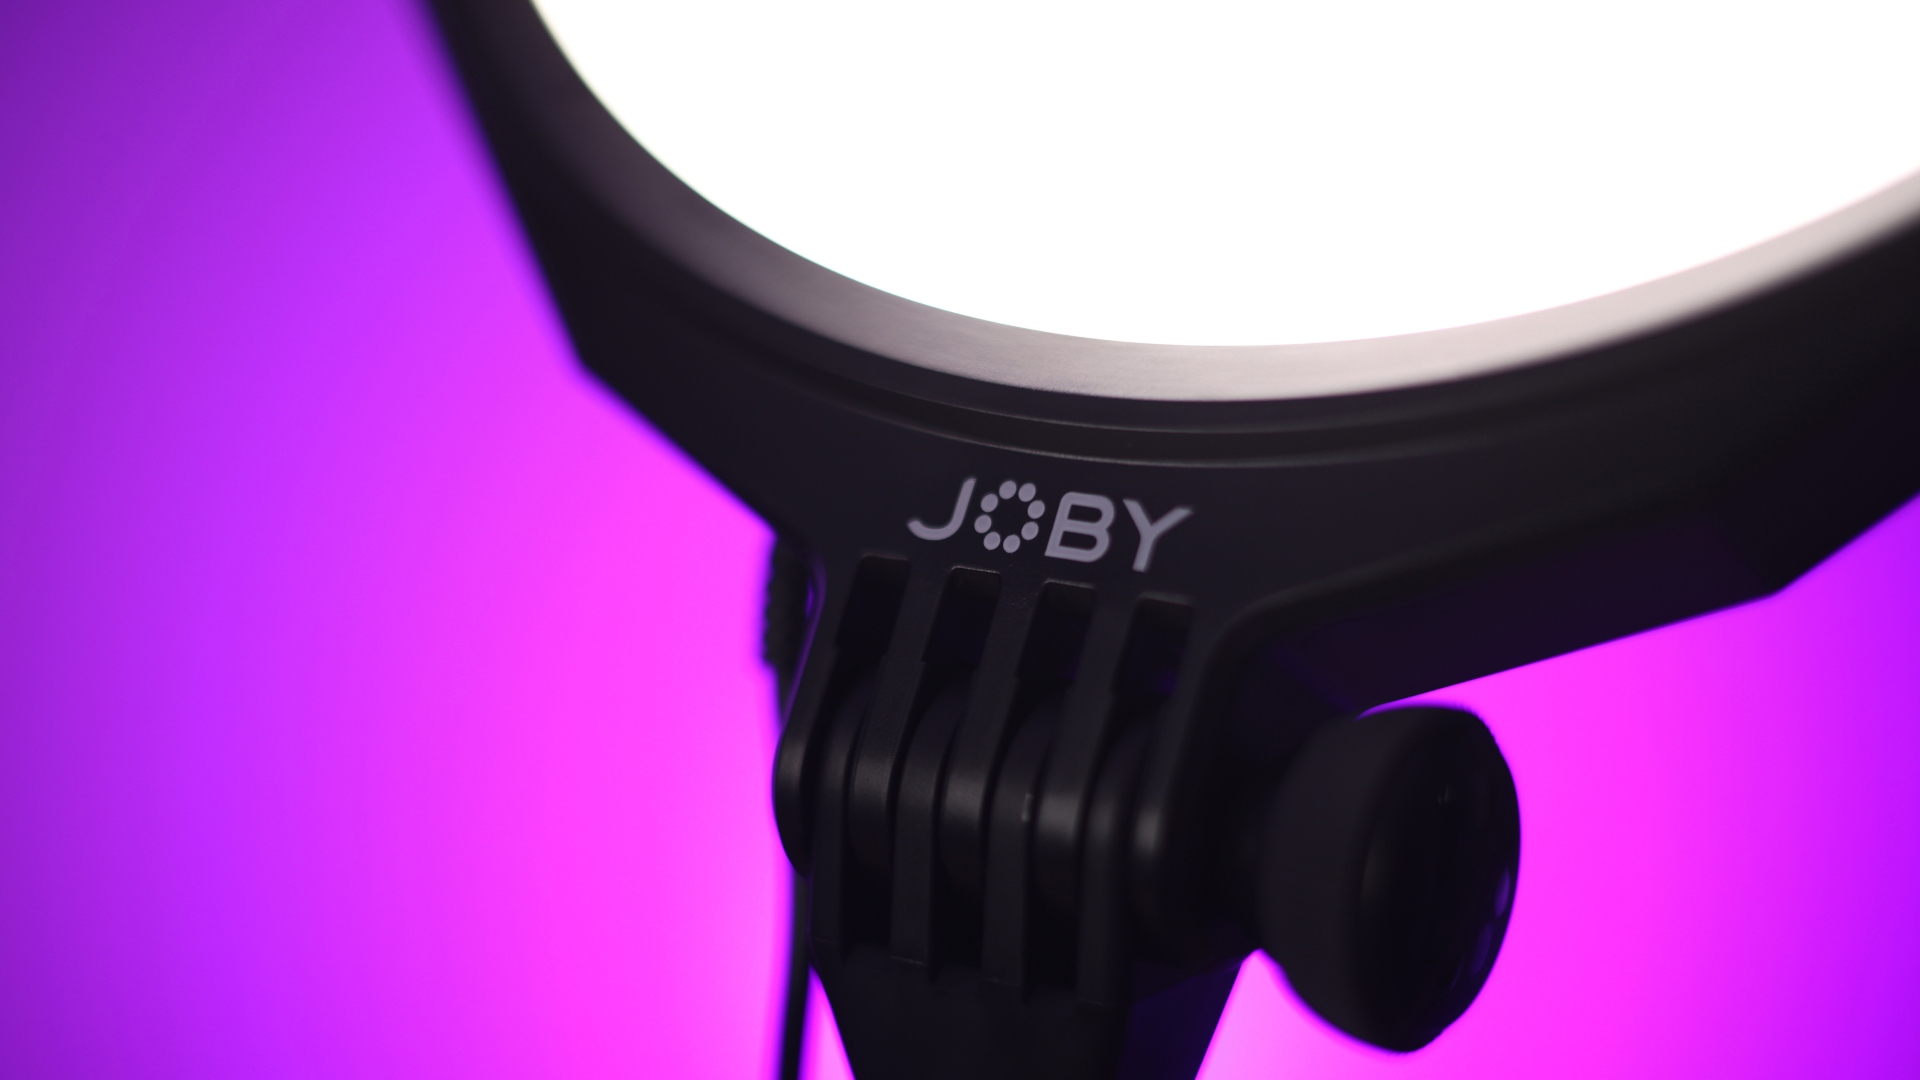 Joby Beamo Studio Key Light review image showing a close up of the brand insignia on the light.